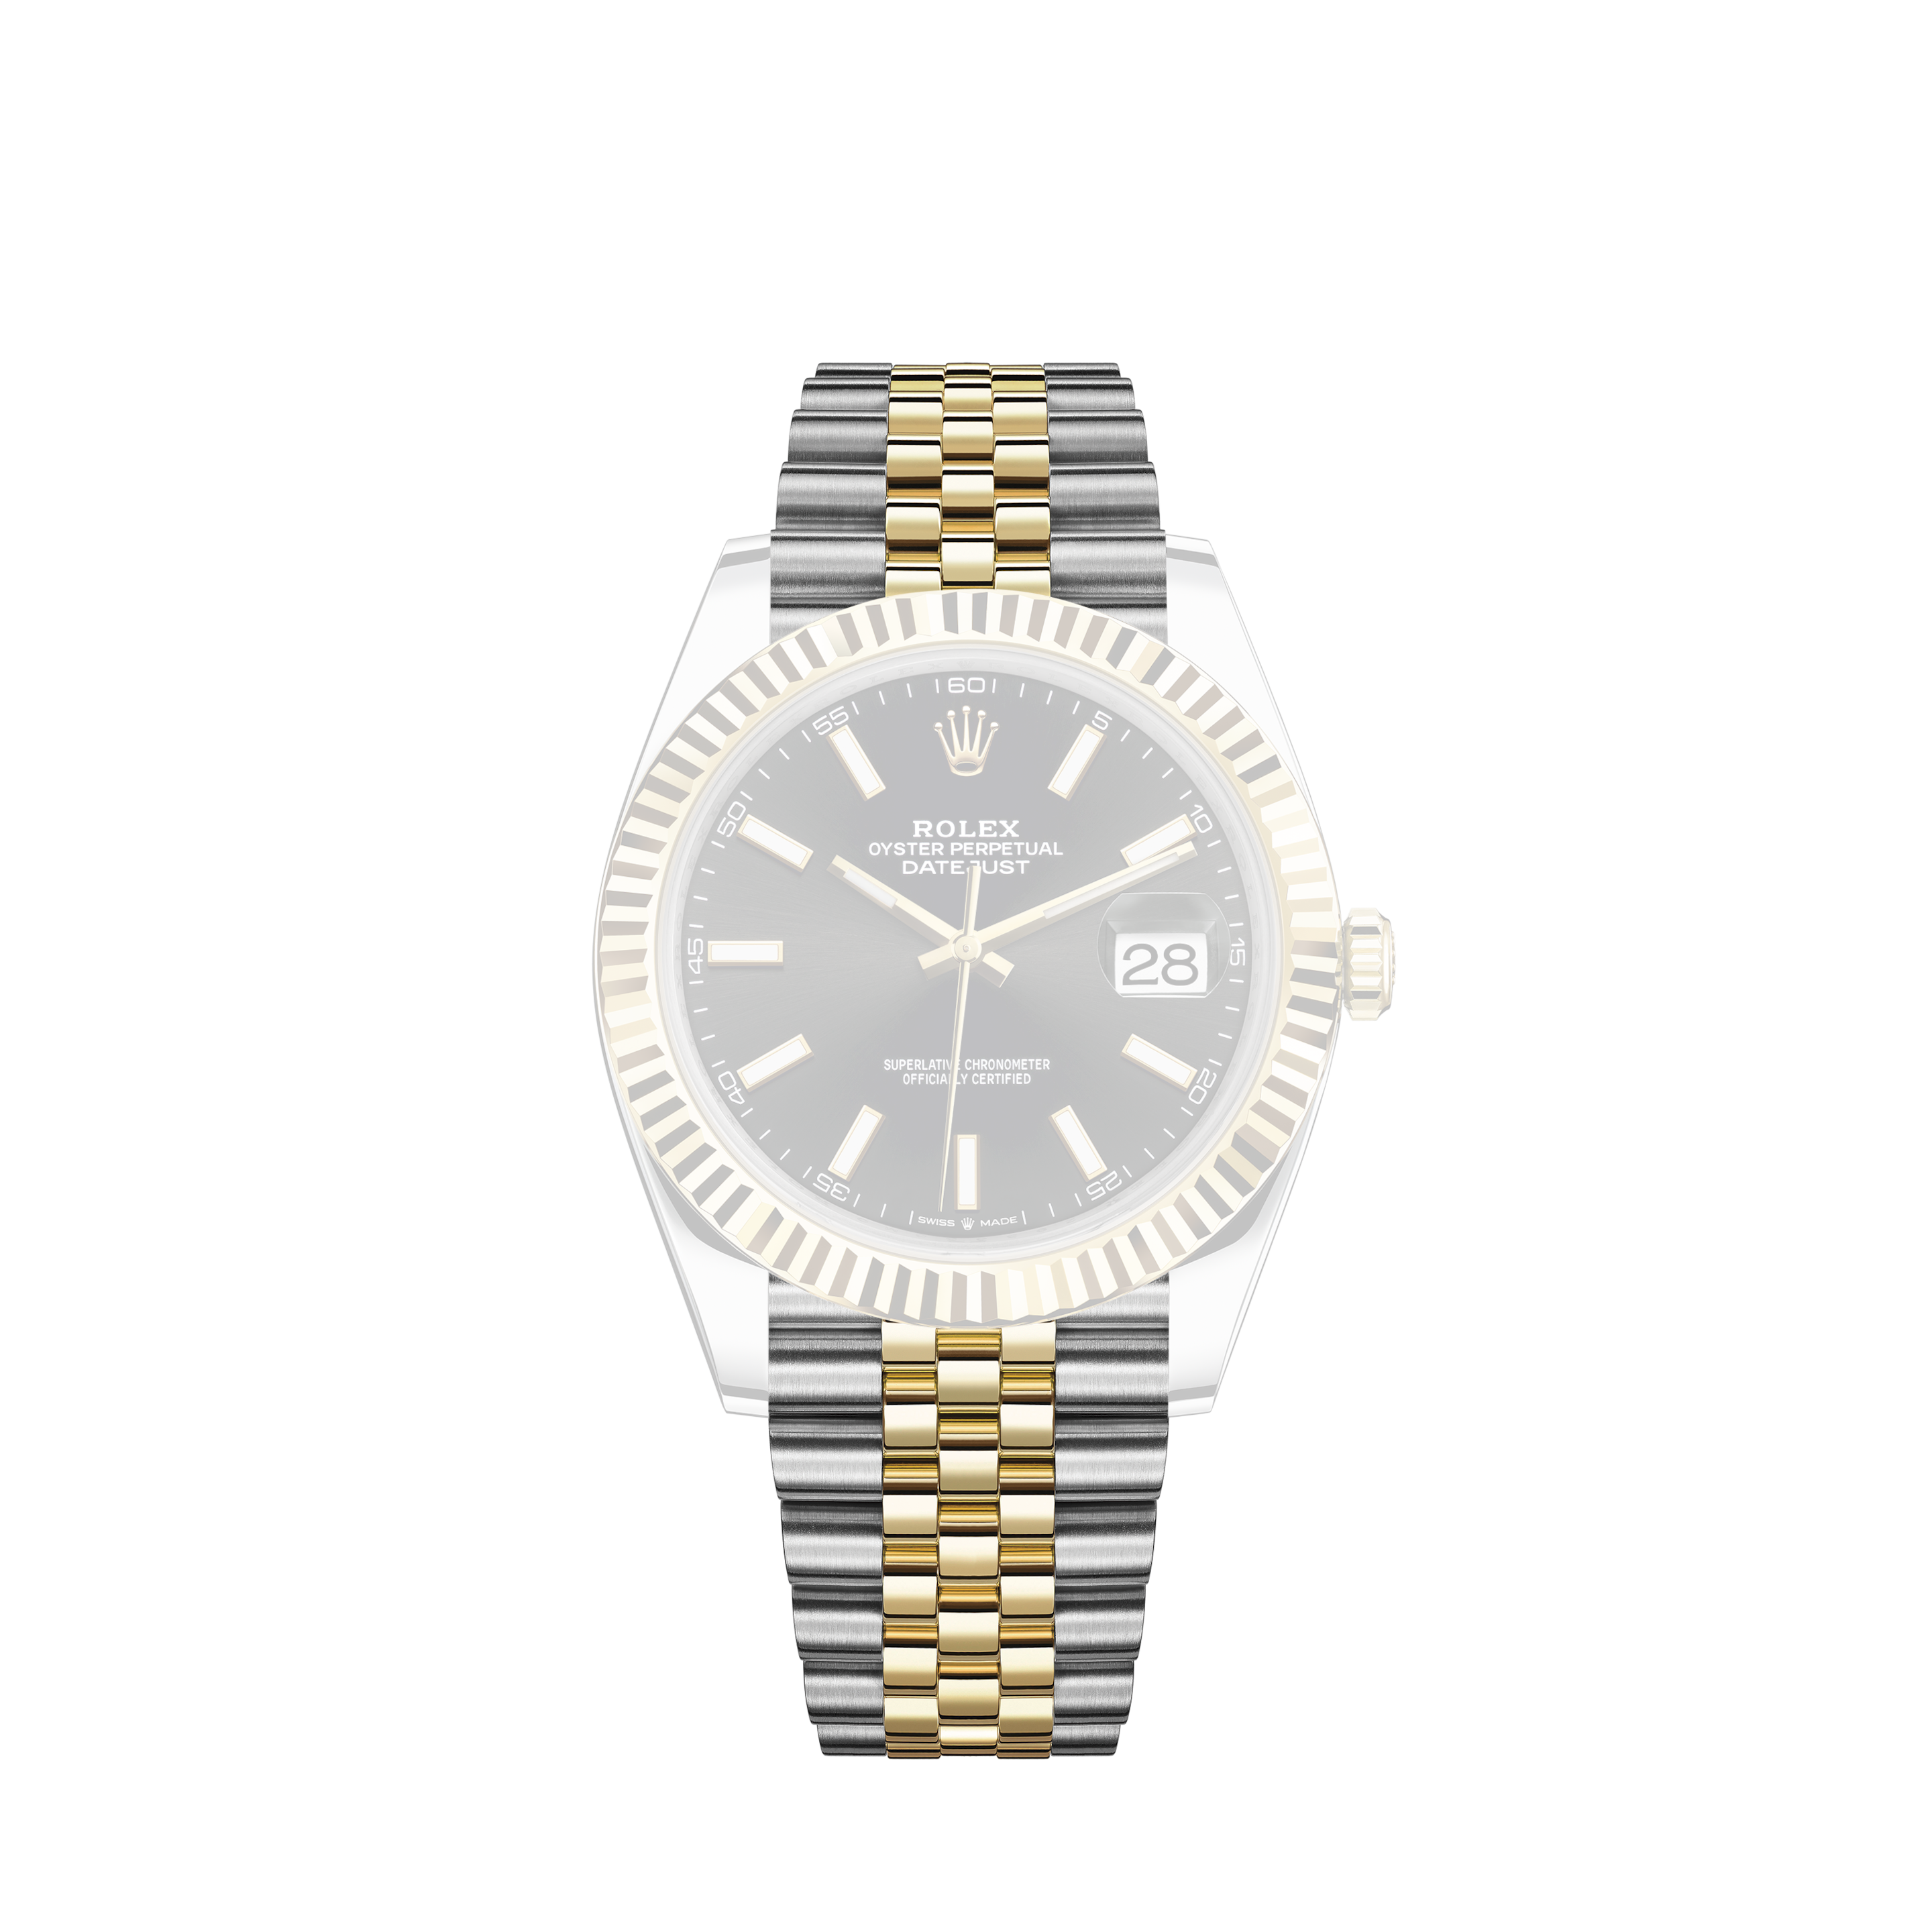 Rolex Rolex ROLEX Datejust 279175G Chocolate Dial New Watch Ladies' WatchRolex Rolex Rolex Datejust 279178G Champagne (IX Diamond) Dial Used Watches Women's Watches